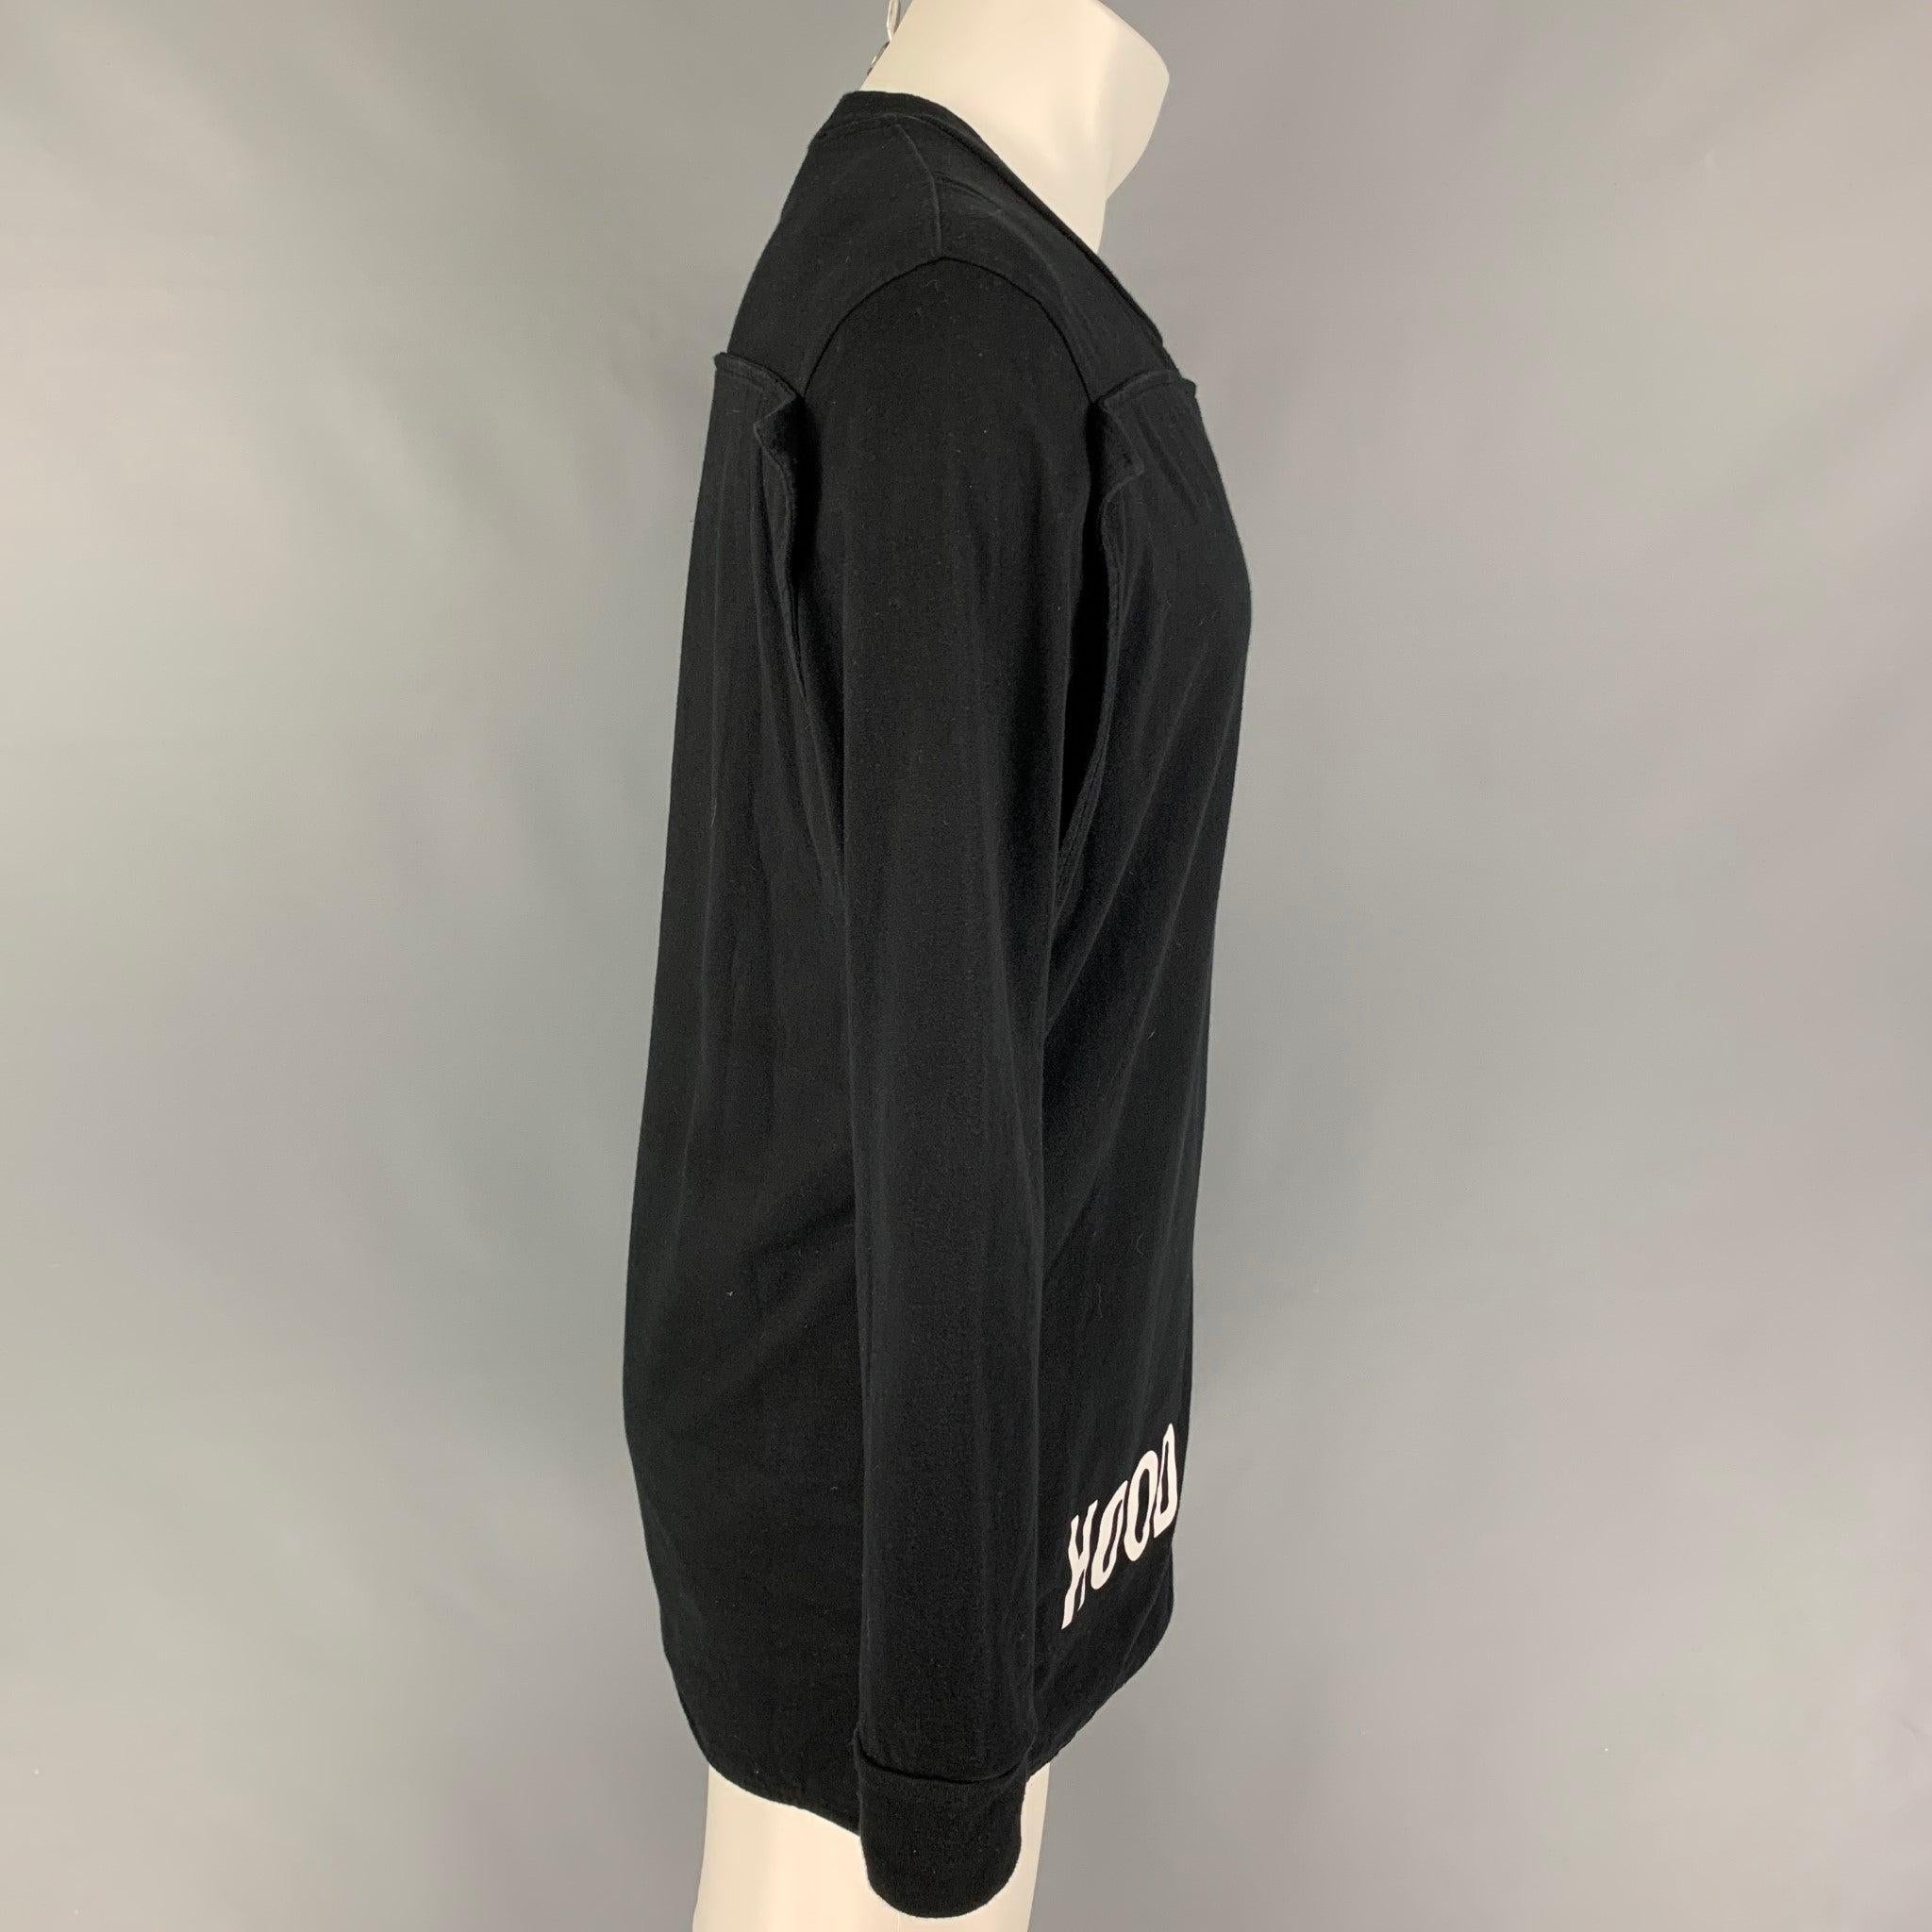 HOOD BY AIR t-shirt comes in a black cotton featuring a white logo detail, front & back panel detail, long sleeves, and a crew-neck.
Good
Pre-Owned Condition. 

Marked:   S 

Measurements: 
 
Shoulder:
18.5 inches  Chest: 40 inches  Sleeve: 26